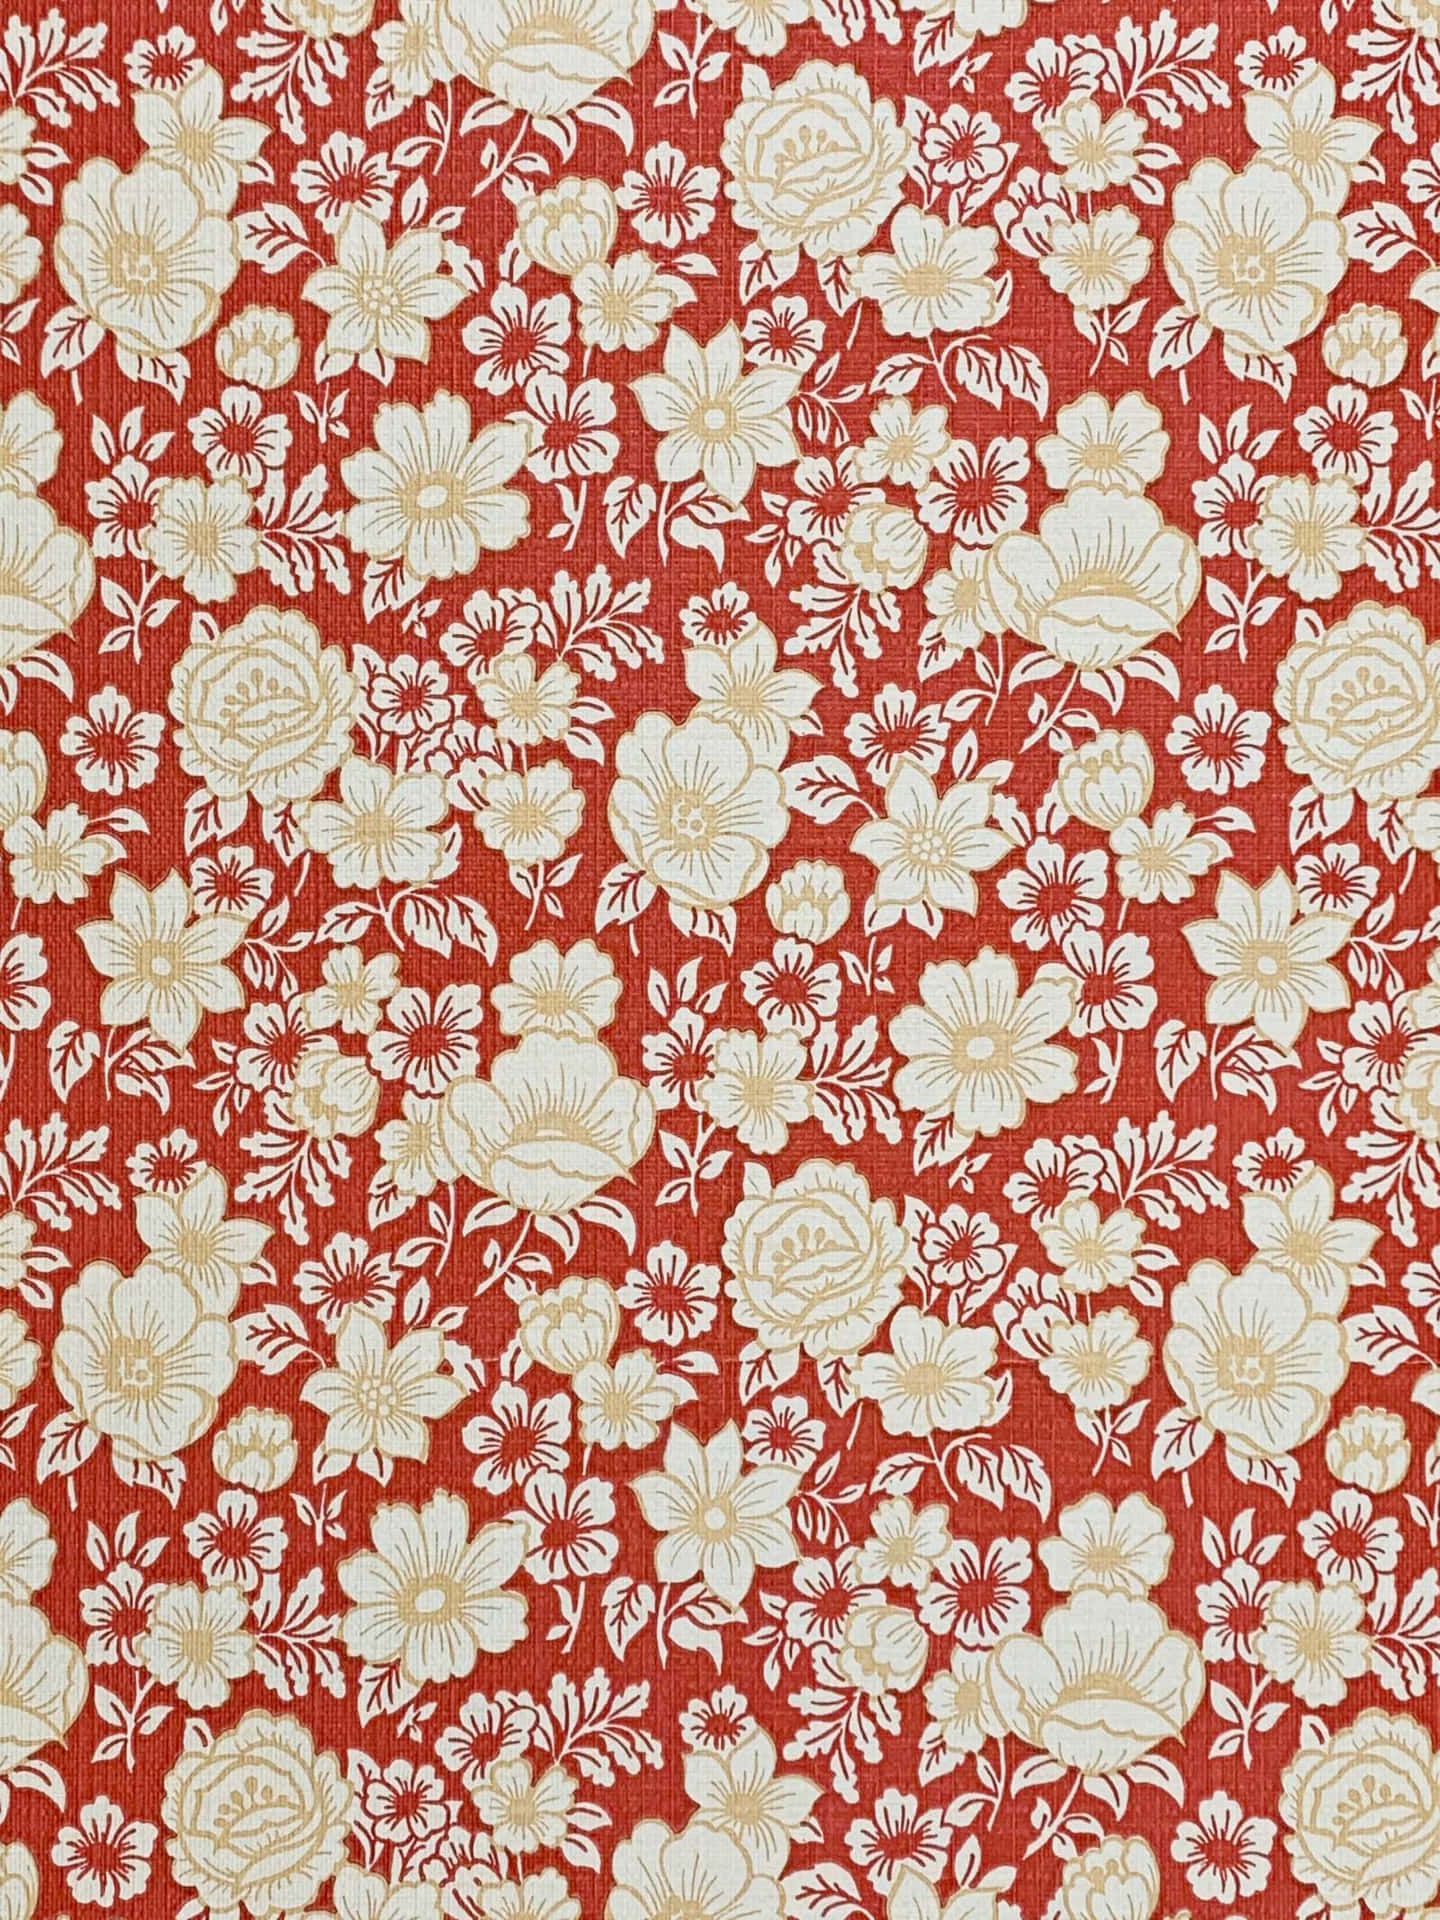 A Red And White Floral Wallpaper